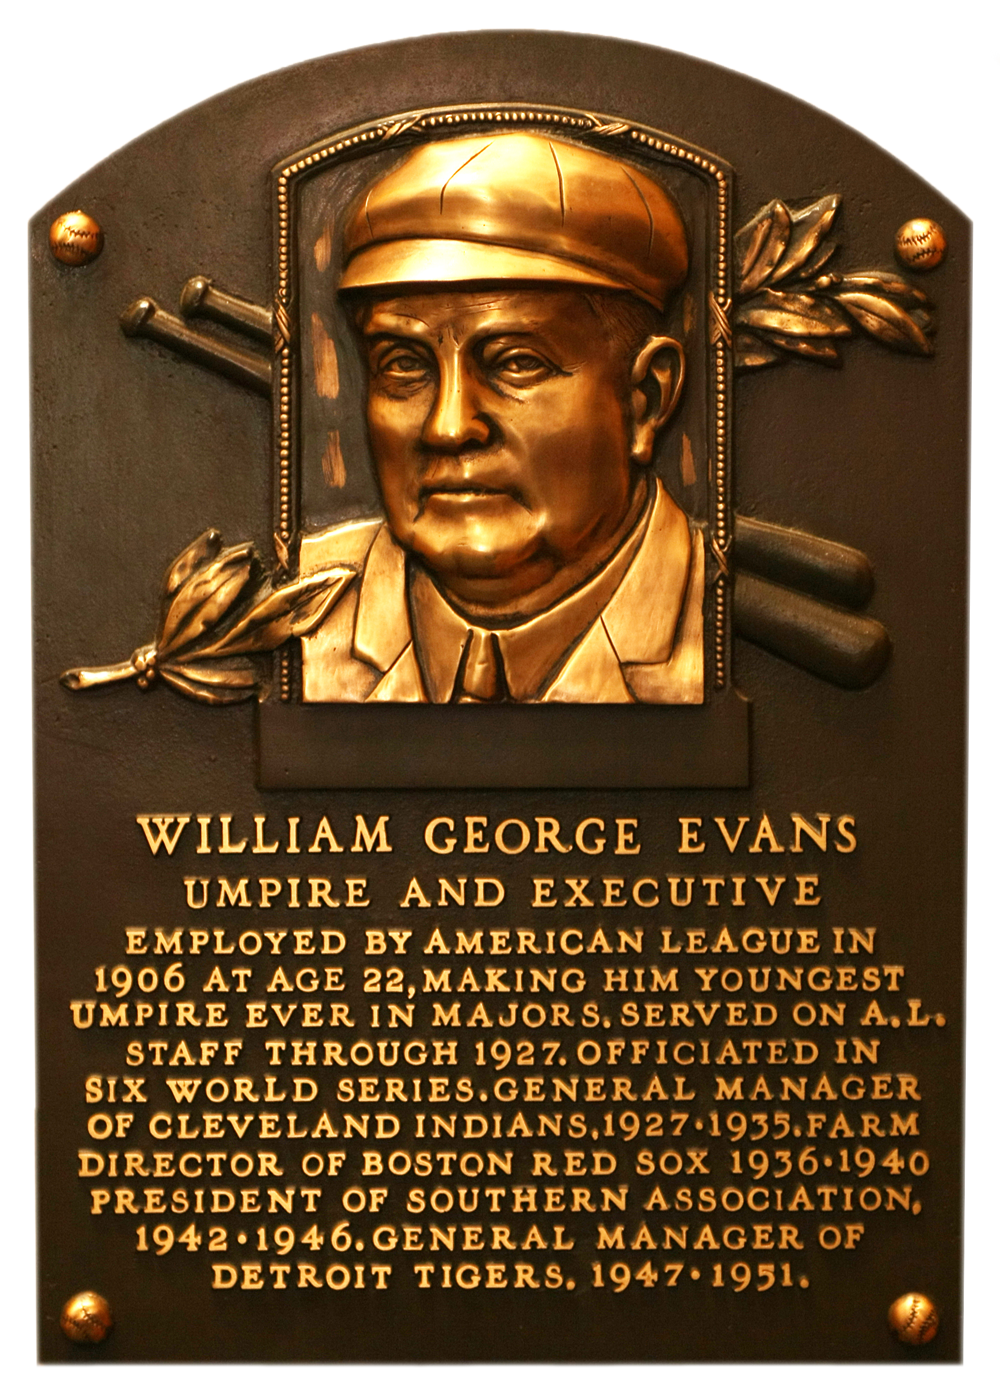 Billy Evans Hall of Fame plaque